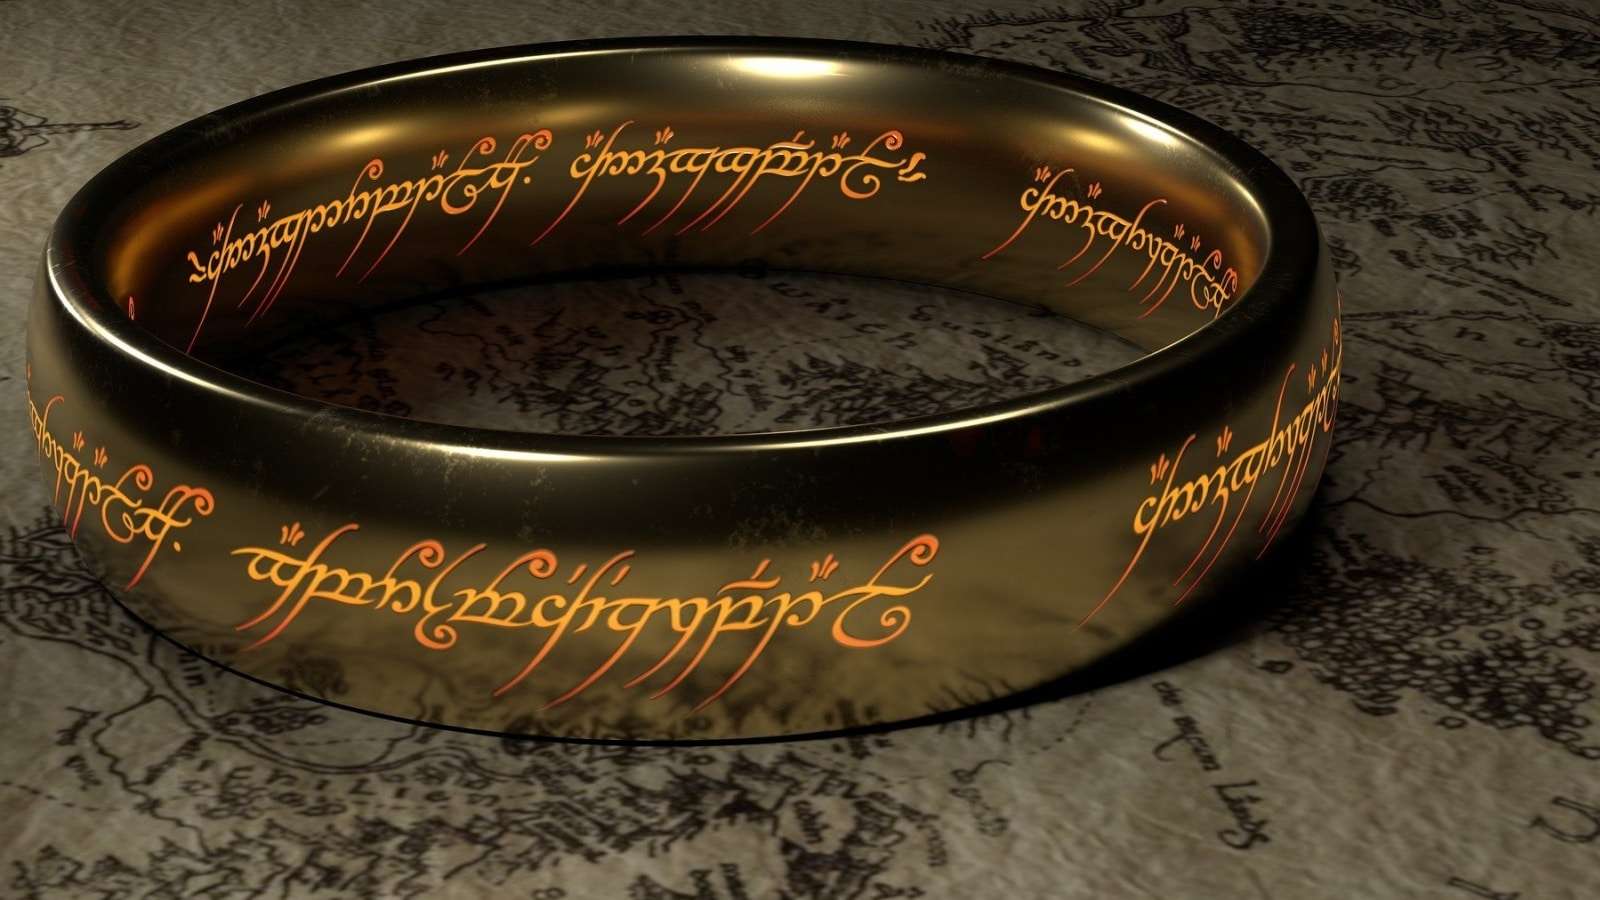 Lord of the Rings movies